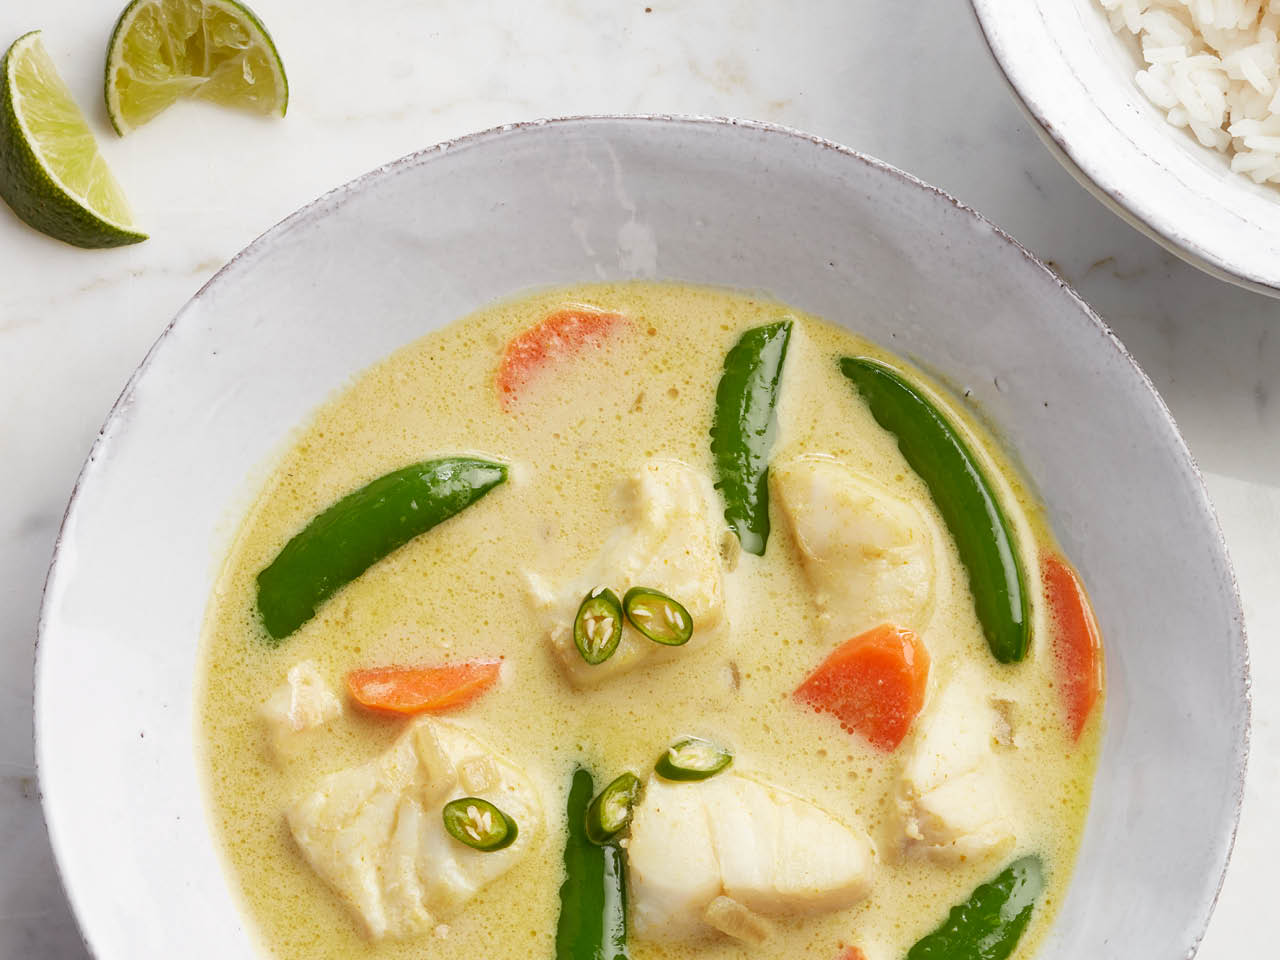 Monday: Coconut green fish curry